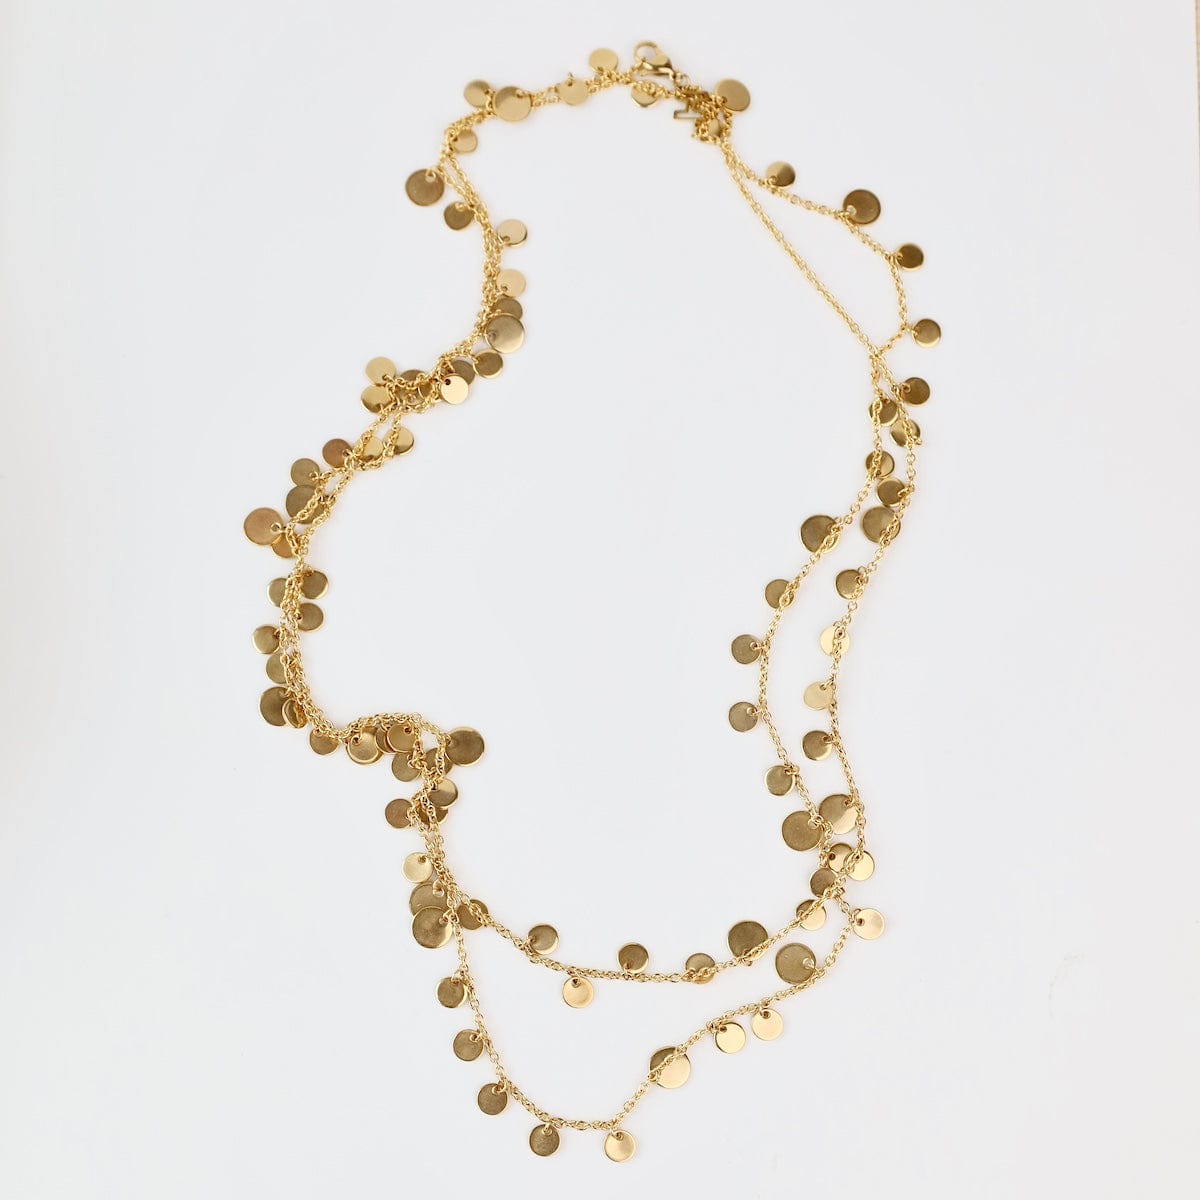 NKL-GPL KALI // The Long Chain with Discs - 18k gold plate